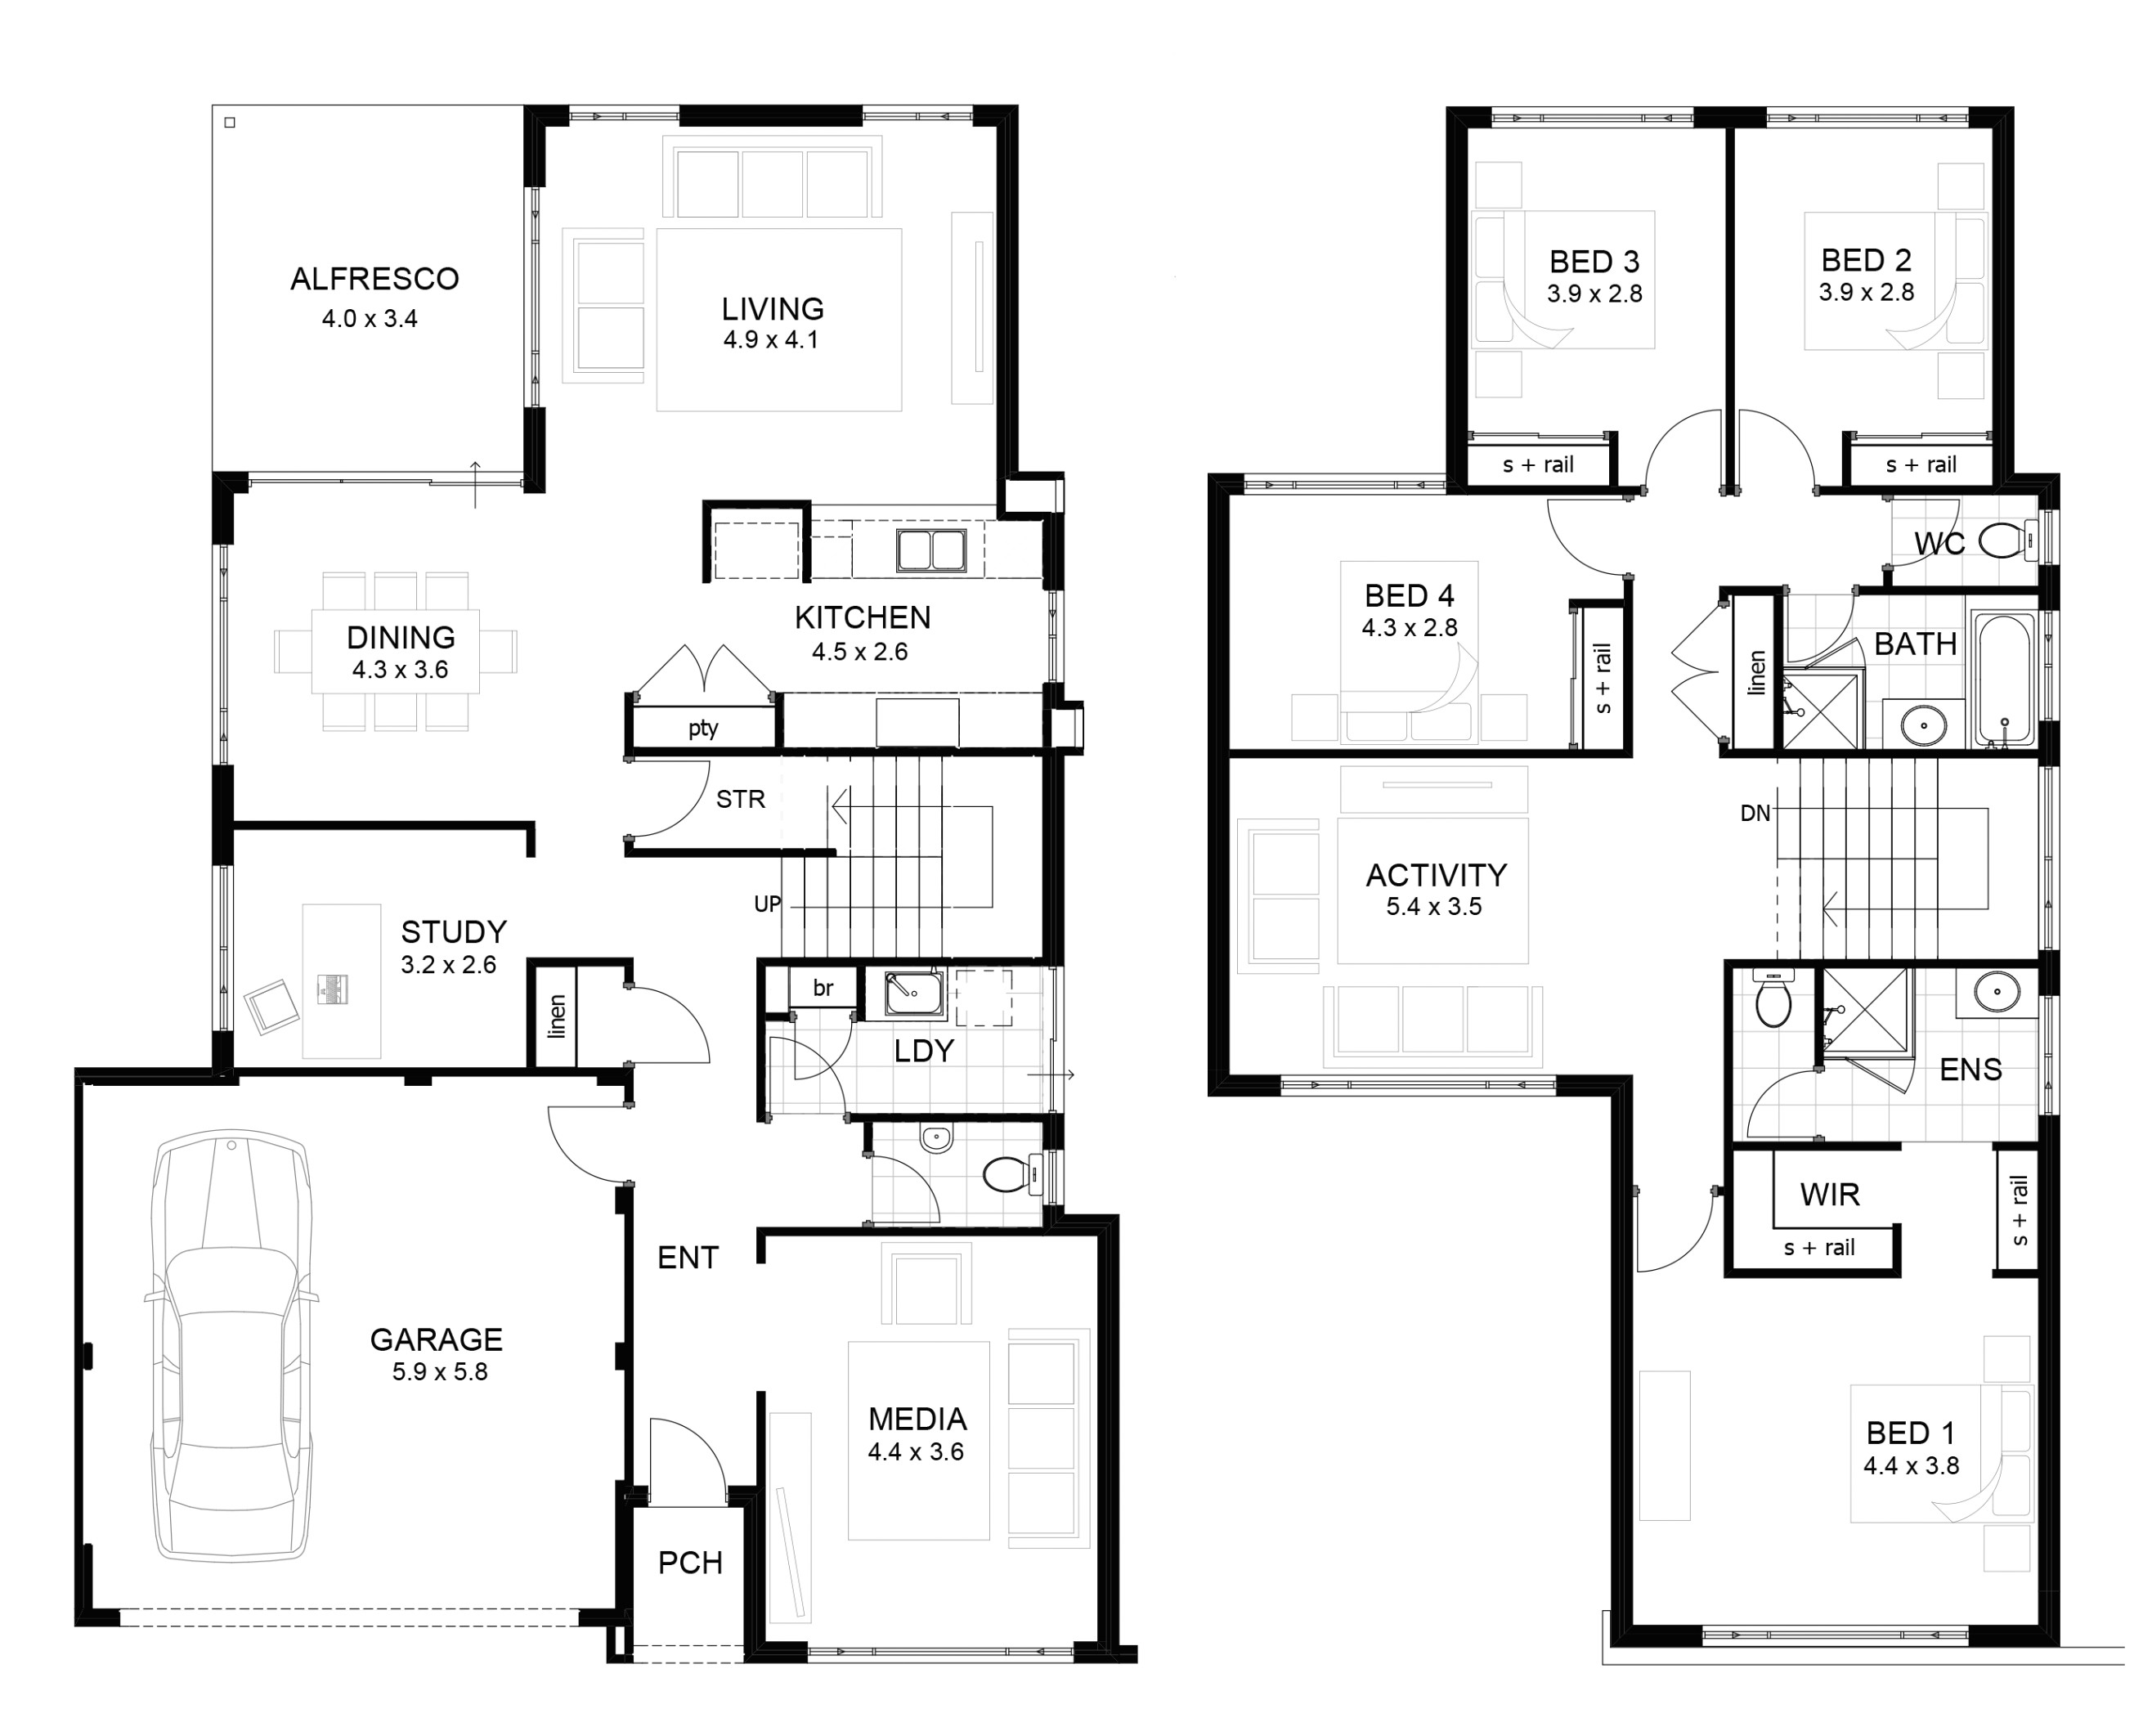 contemporary two story home floor plans floor plan 2 story house throughout luxury sample floor plans 2 story home